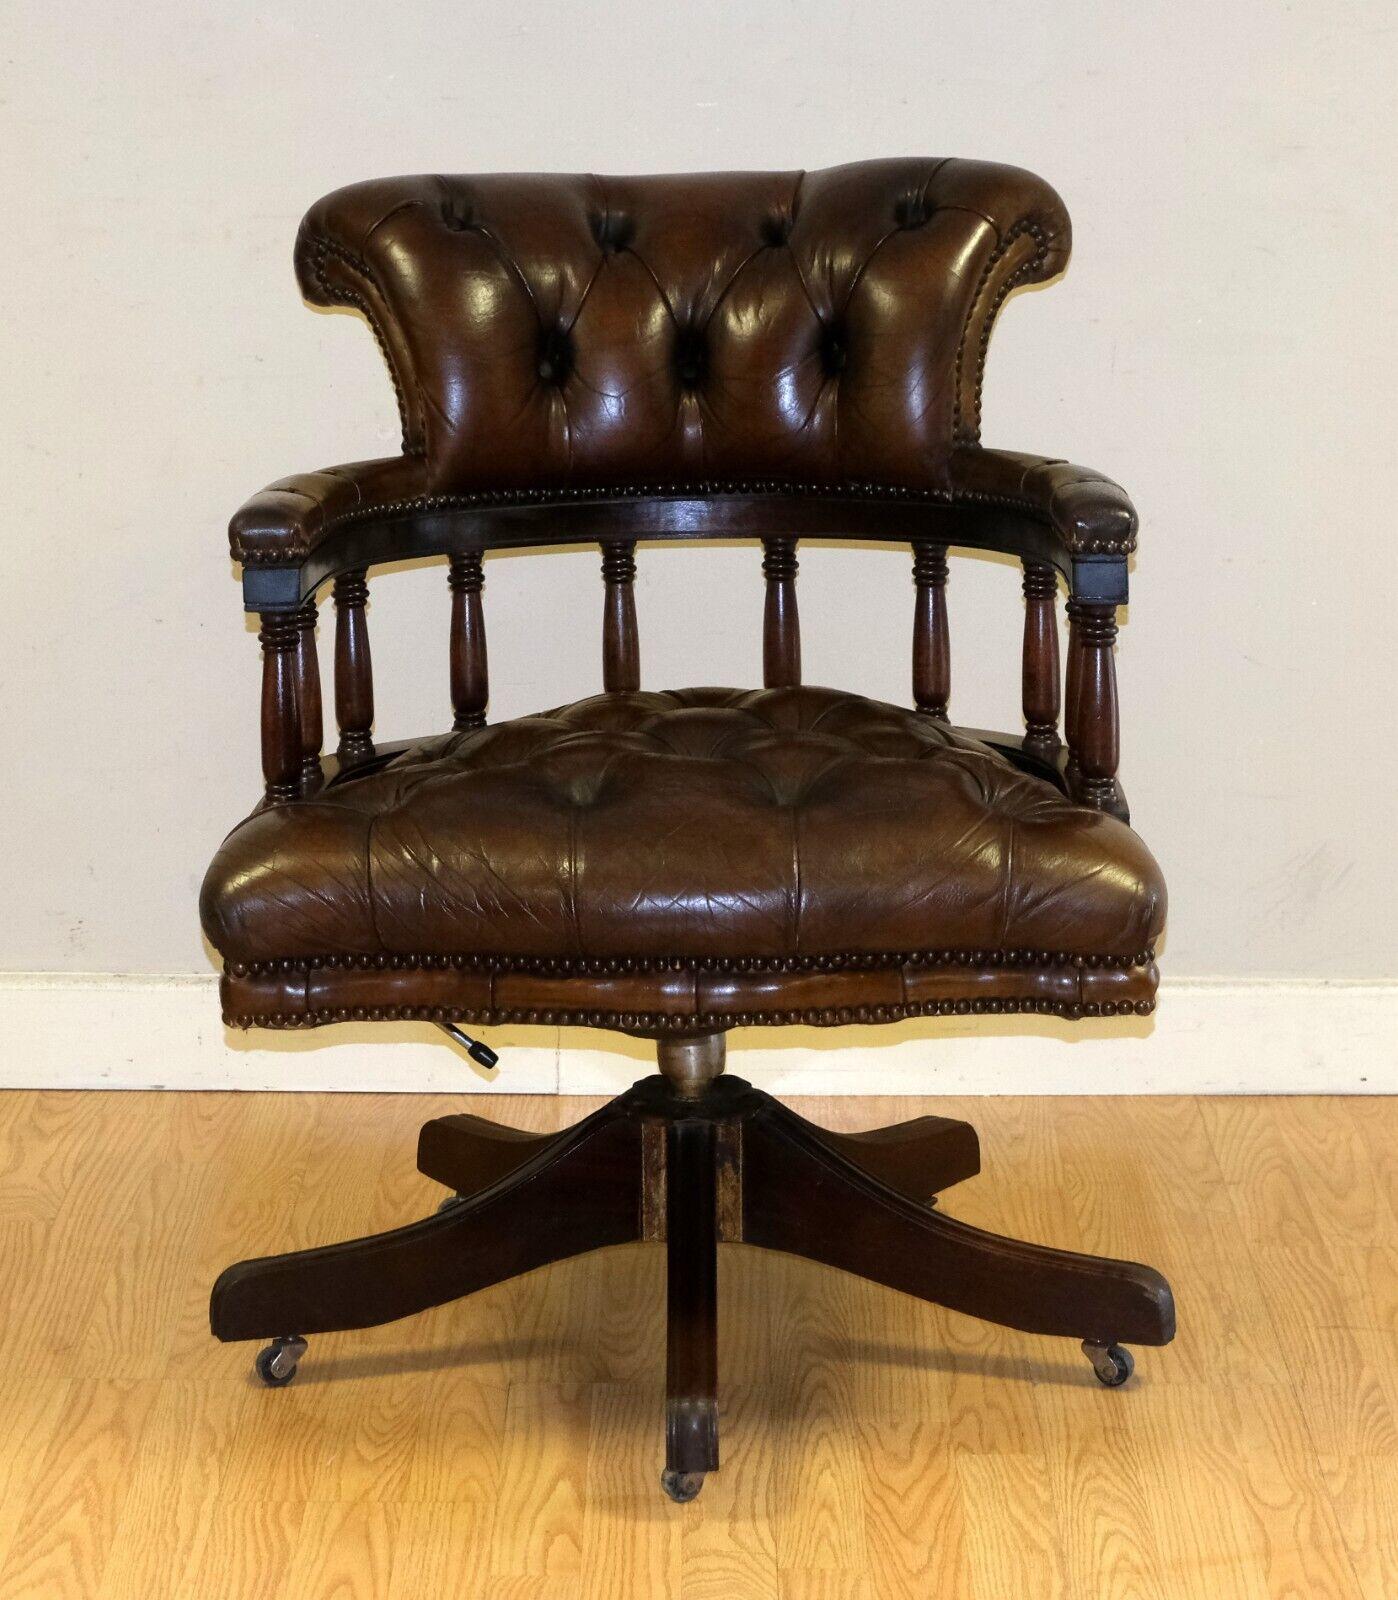 We are delighted to offer for sale this gorgeous fully restored oak frame chesterfield cigar brown leather captain armchair.

This piece combines style and attractiveness, which would add glamour to your office or any room. This piece has been